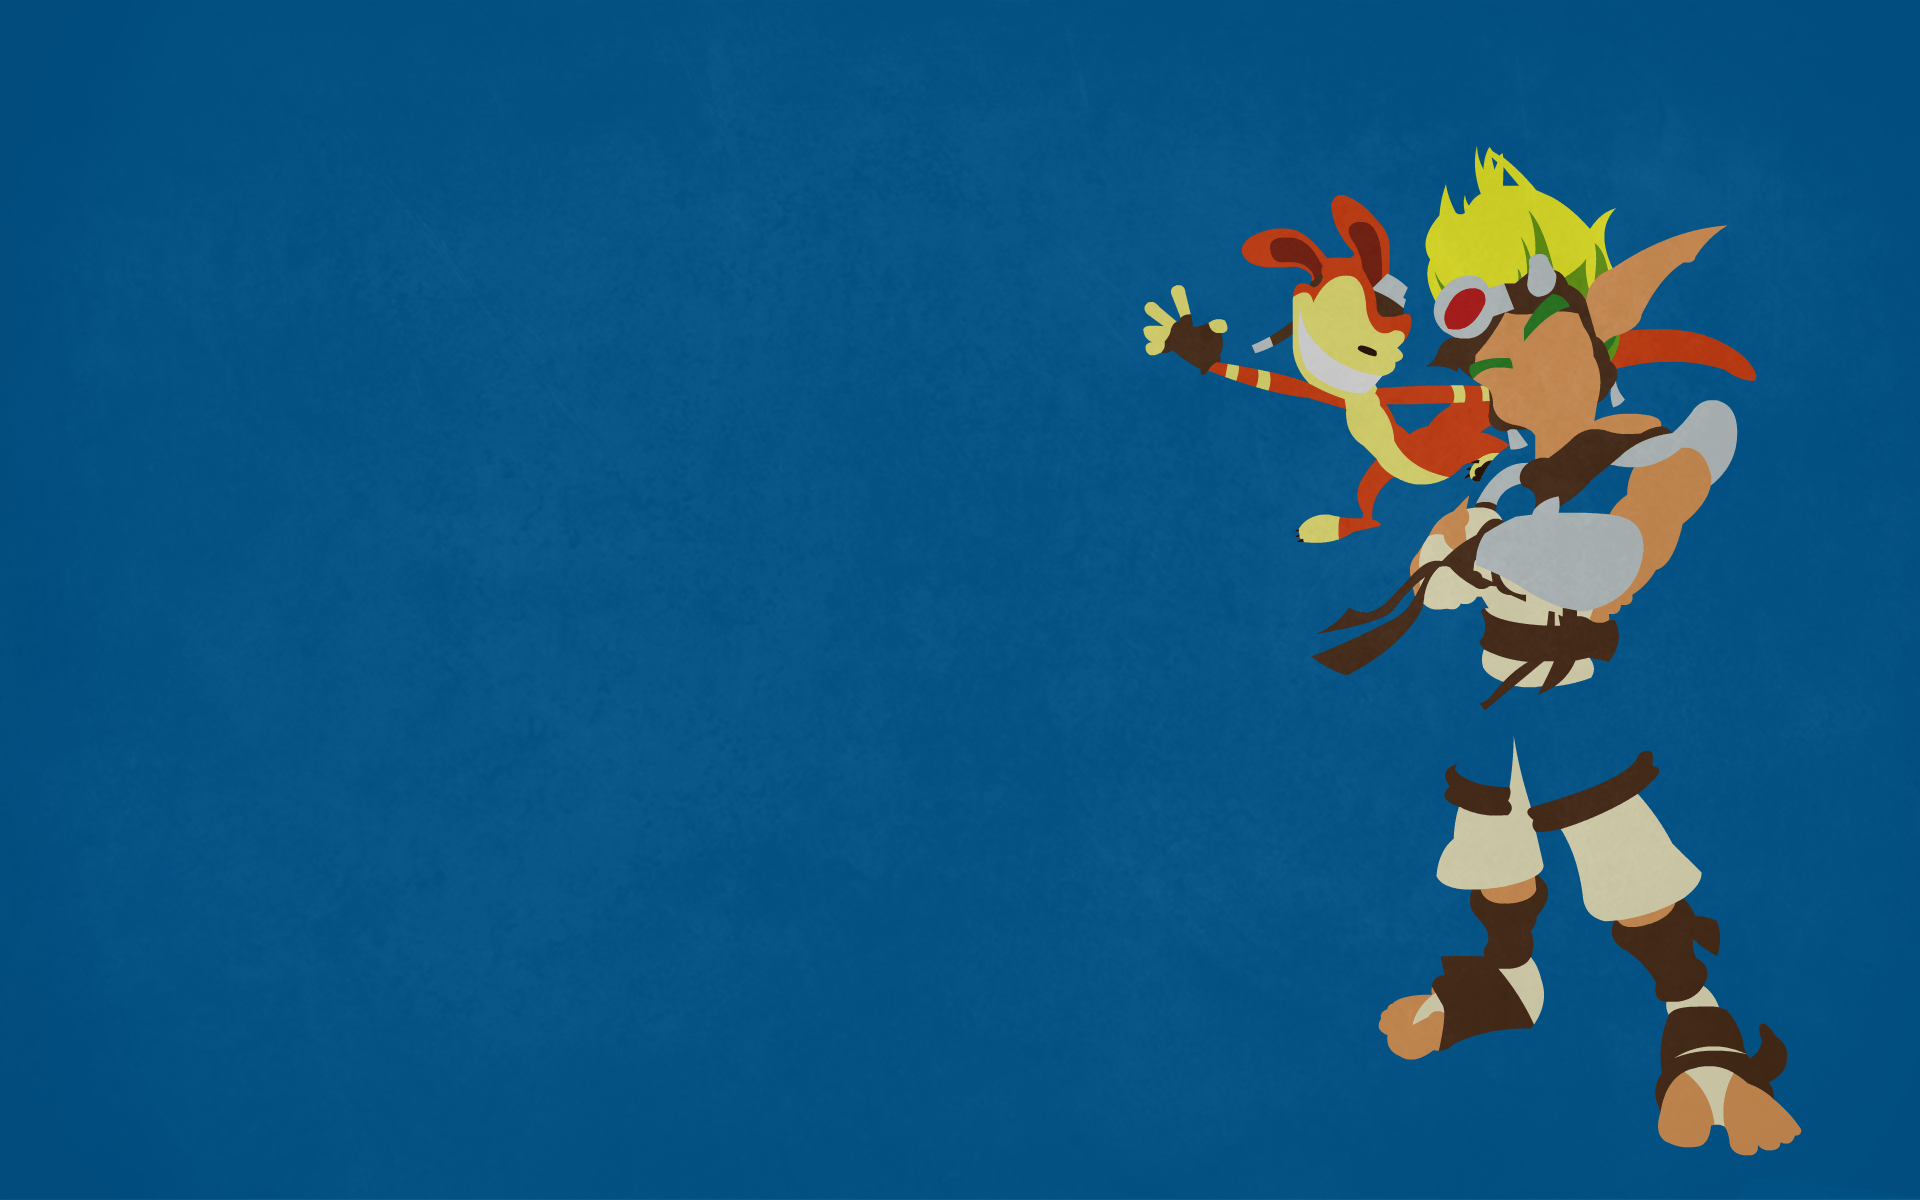 Jak and Daxter 3